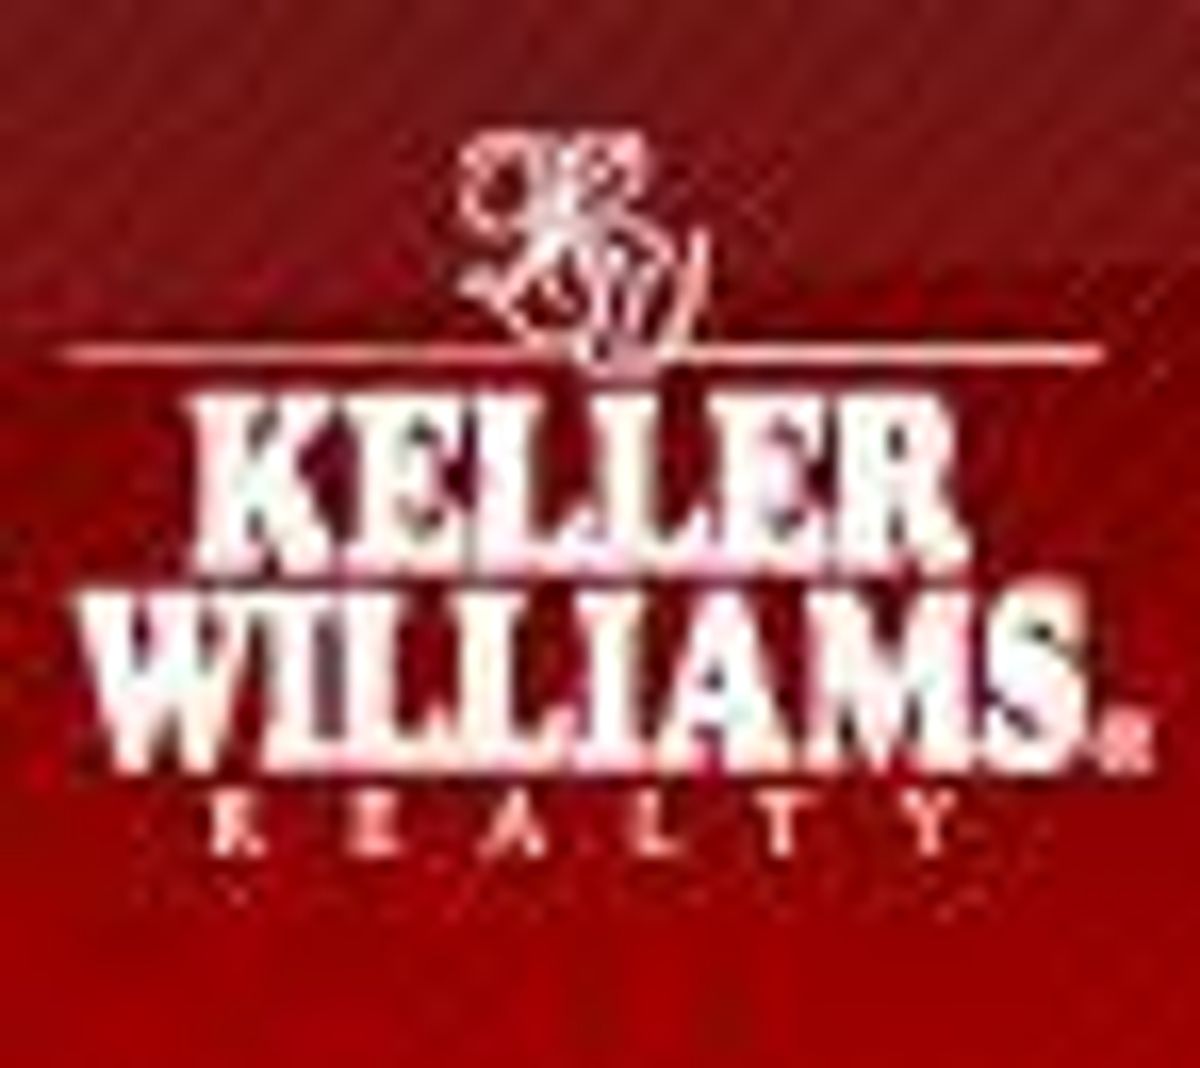 Photo for Britney Wilson, Listing Agent at KELLER WILLIAMS REALTY SMART